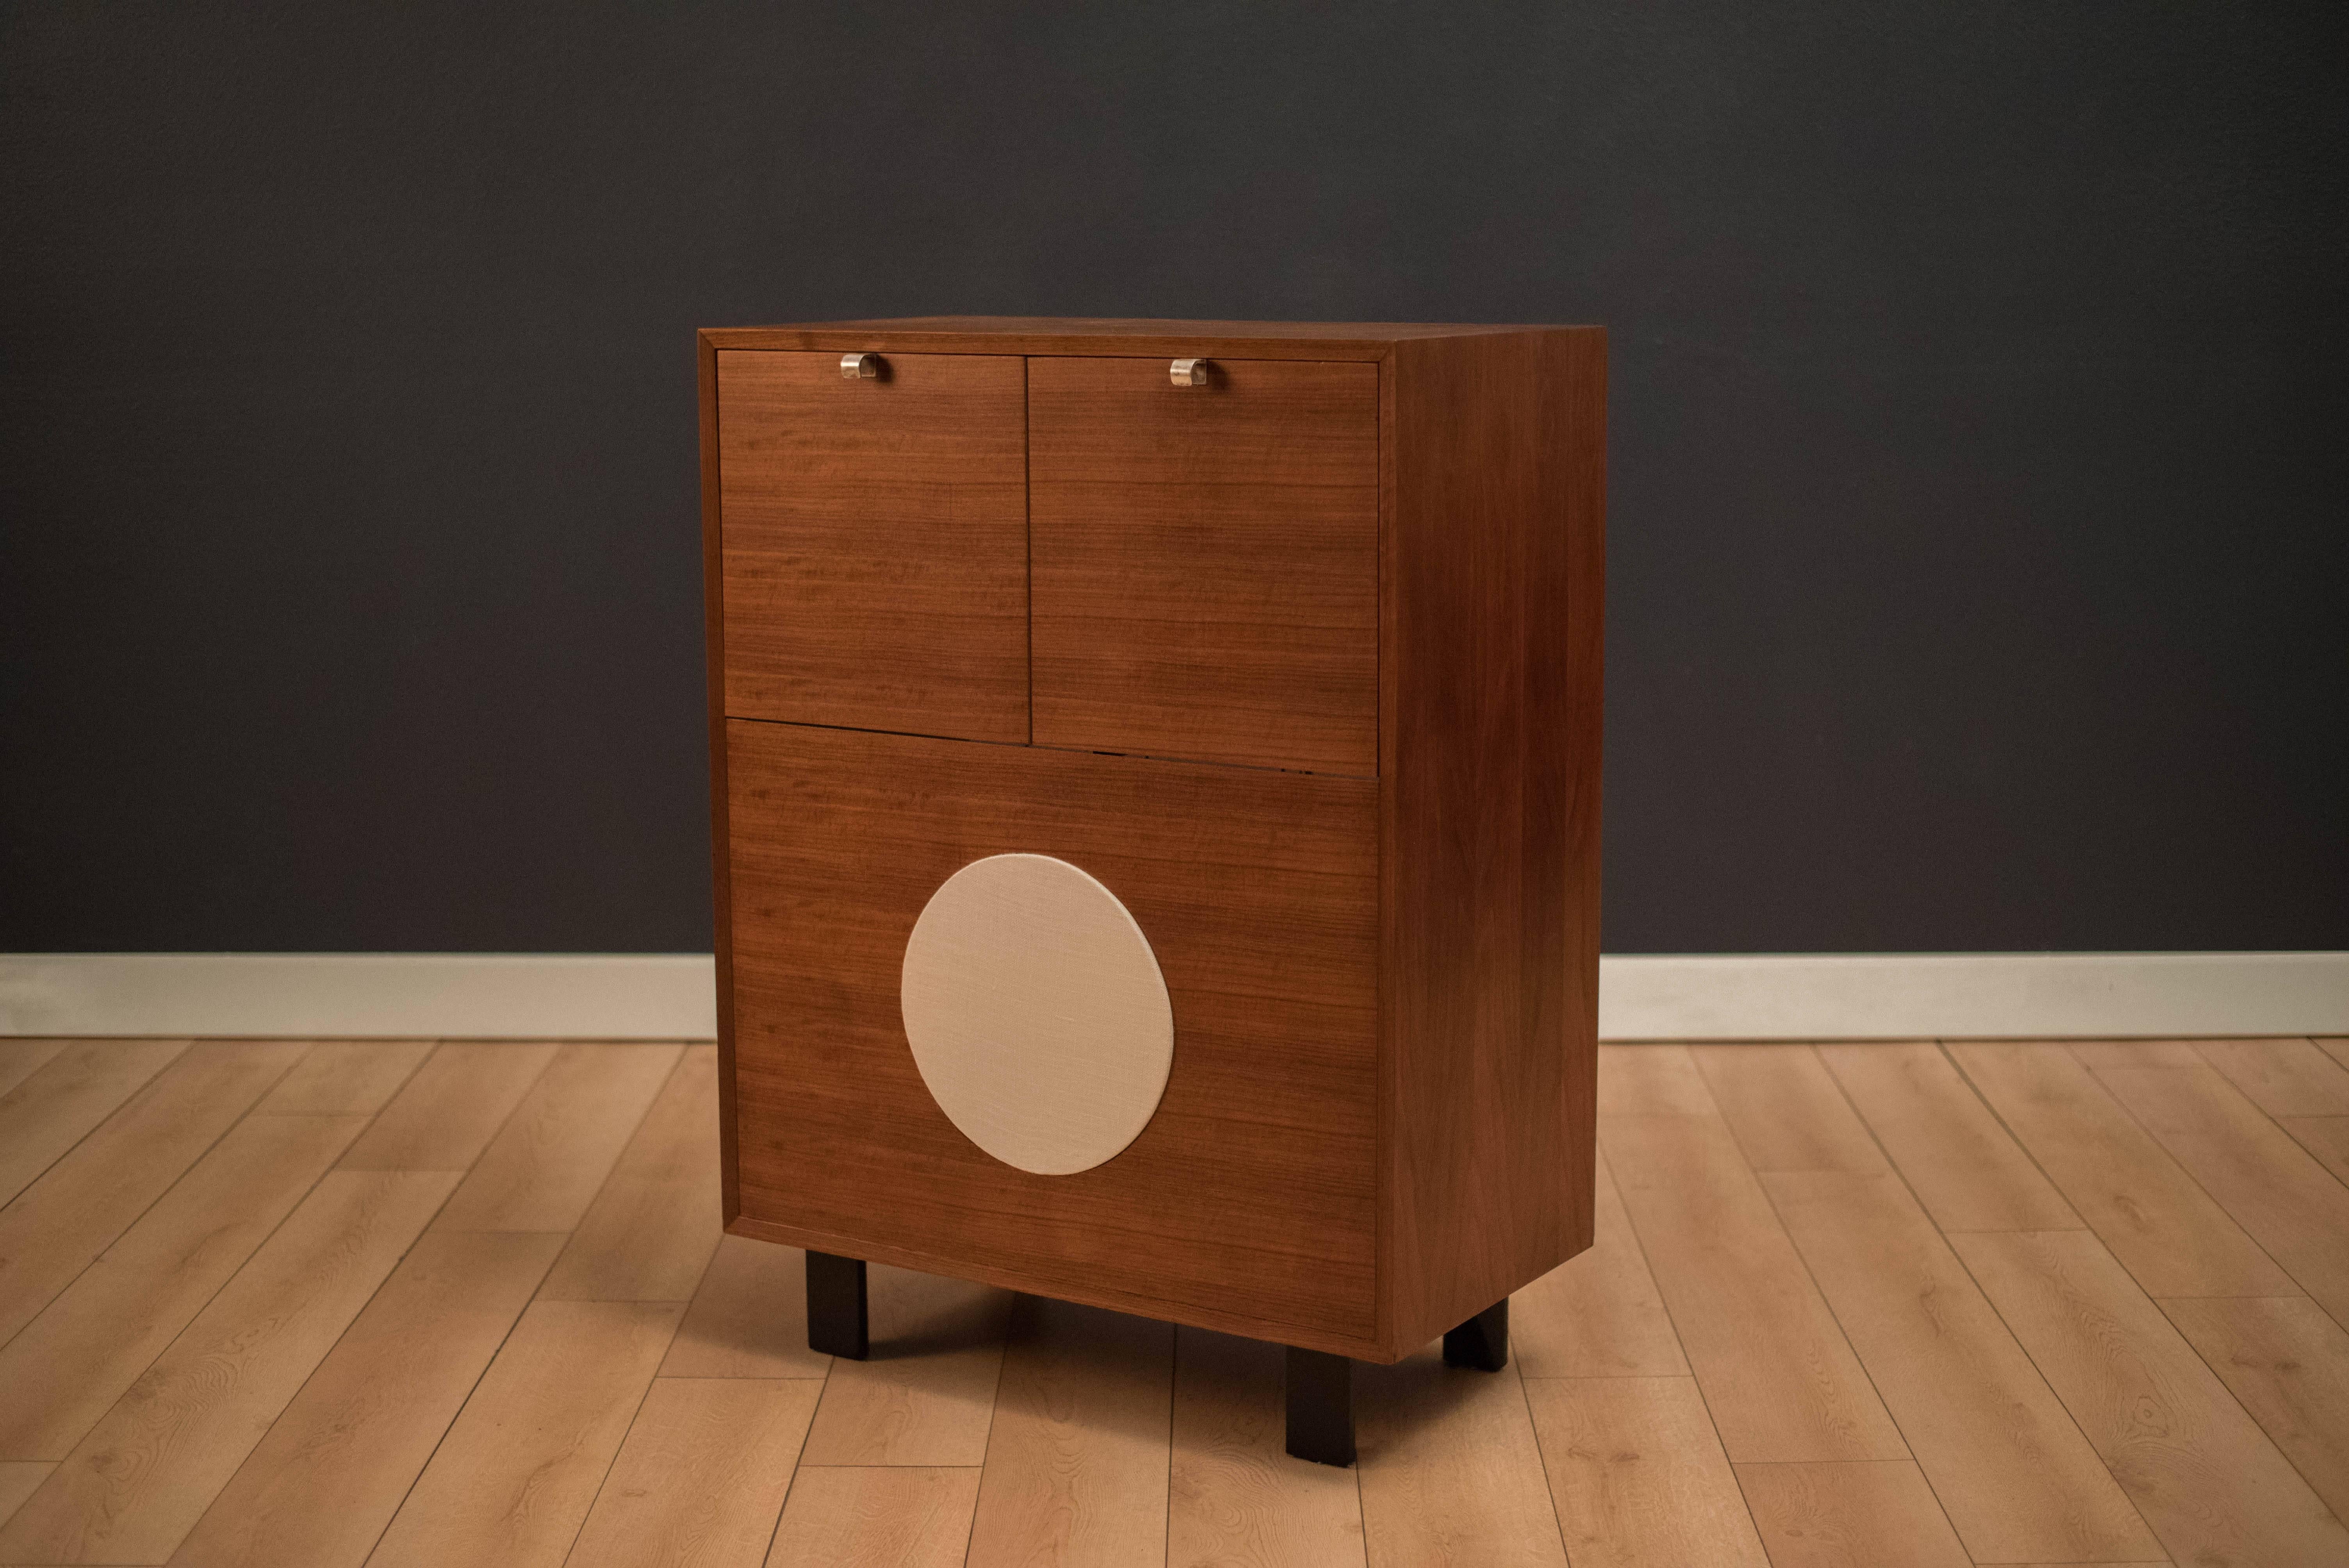 Mid-Century walnut record cabinet designed by George Nelson for Herman Miller. This piece retains the original black lacquered legs and signature aluminum pulls making it an iconic piece to any audio collection. Includes the original record player